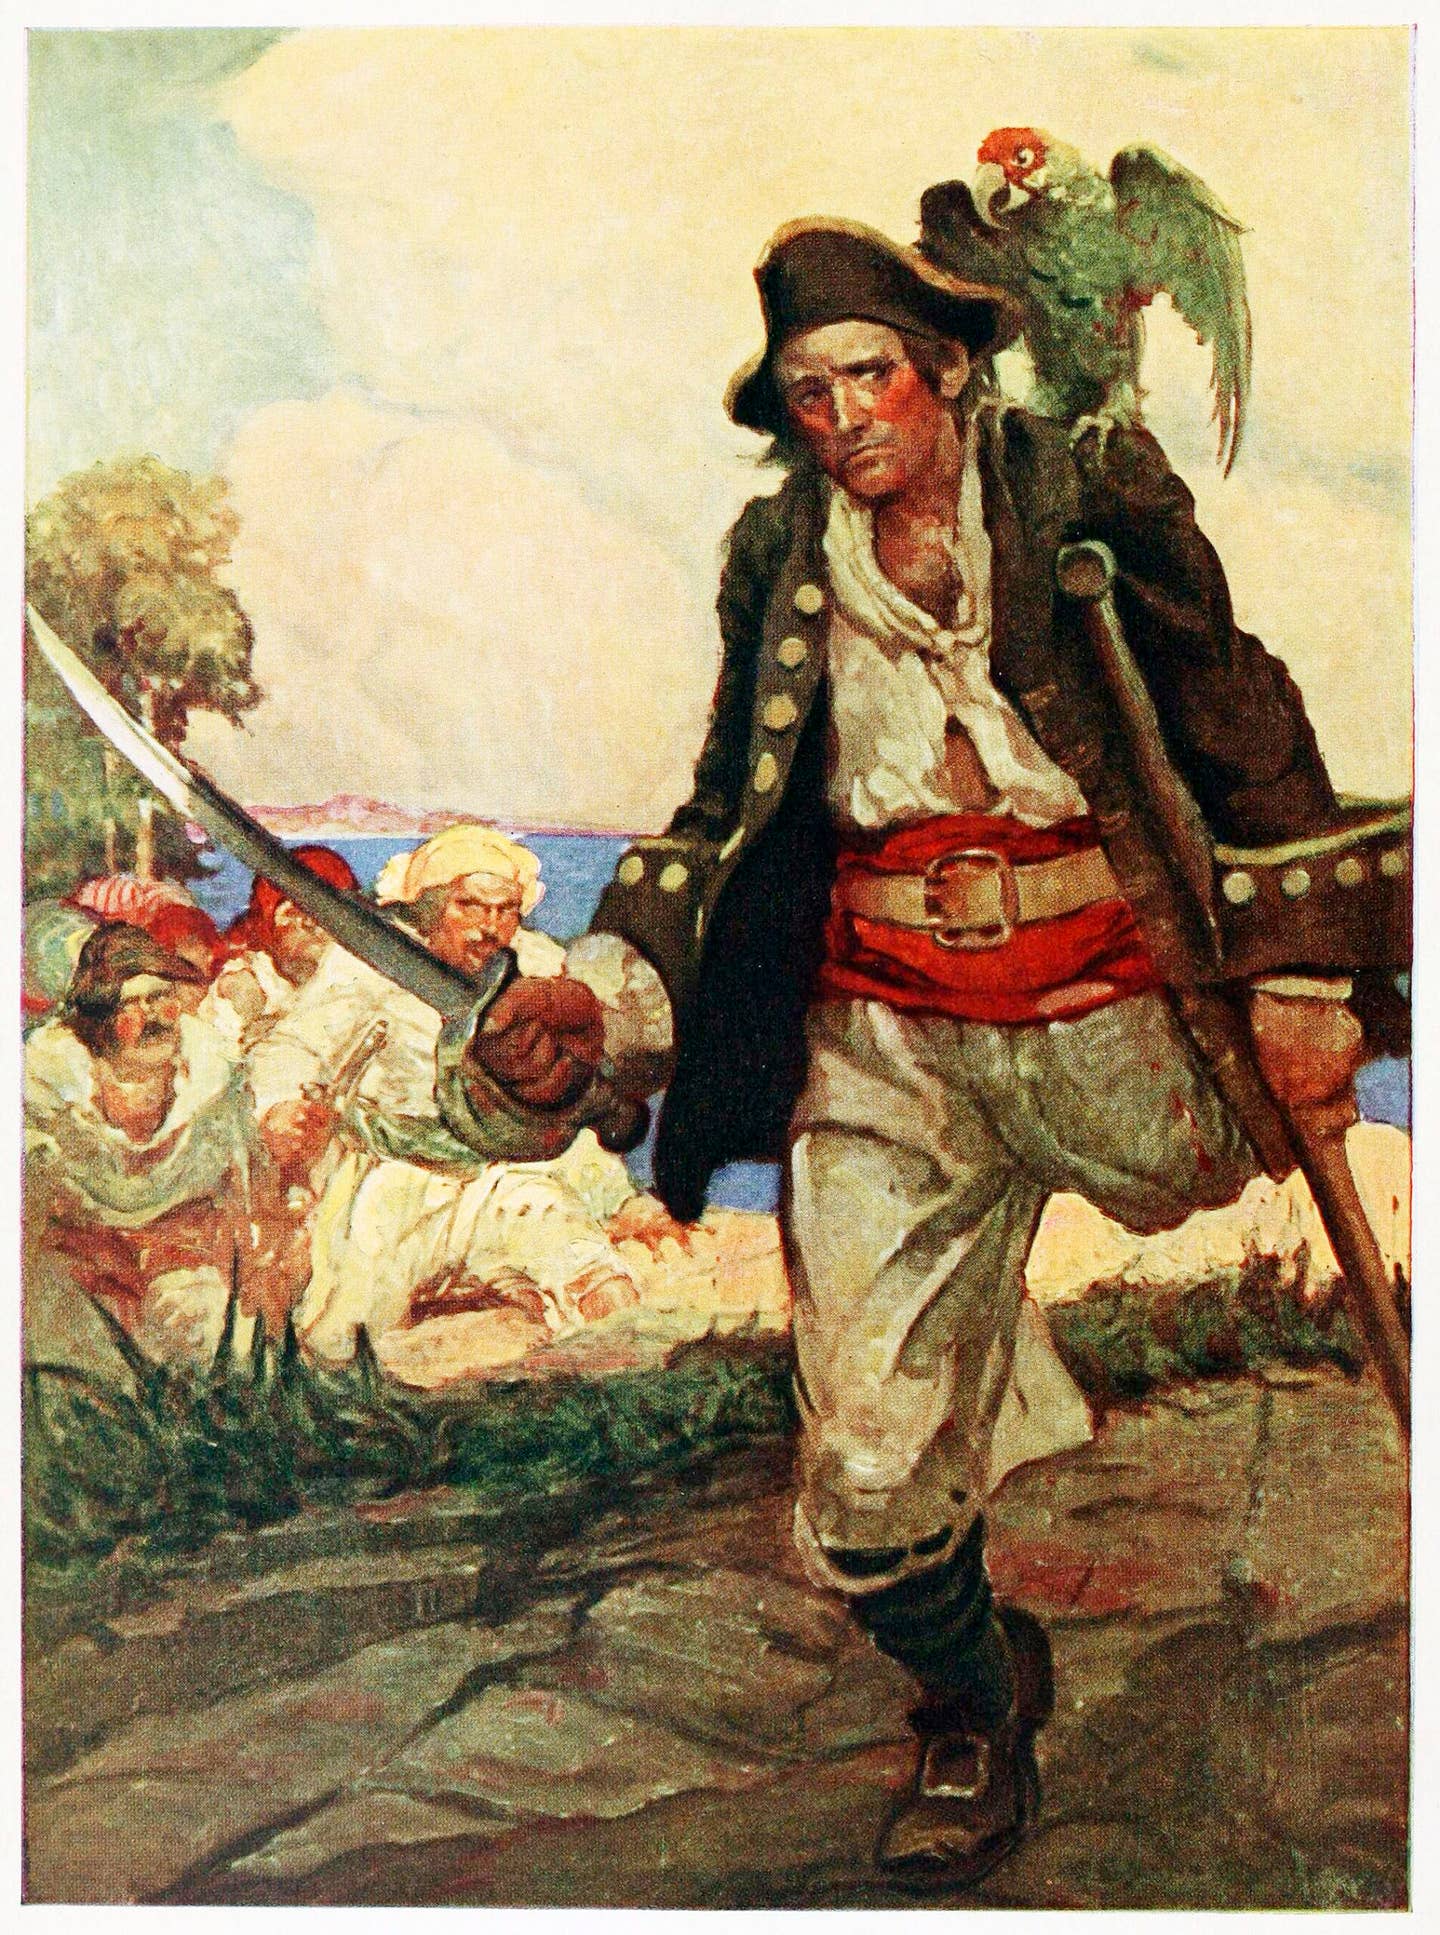 The frontispiece from a 1915 edition of <em>Treasure Island</em> provides a classic depiction of Long John Silver – complete with a parrot. <em>Photo by Historica Graphica Collection/Heritage Images/Getty Images</em>